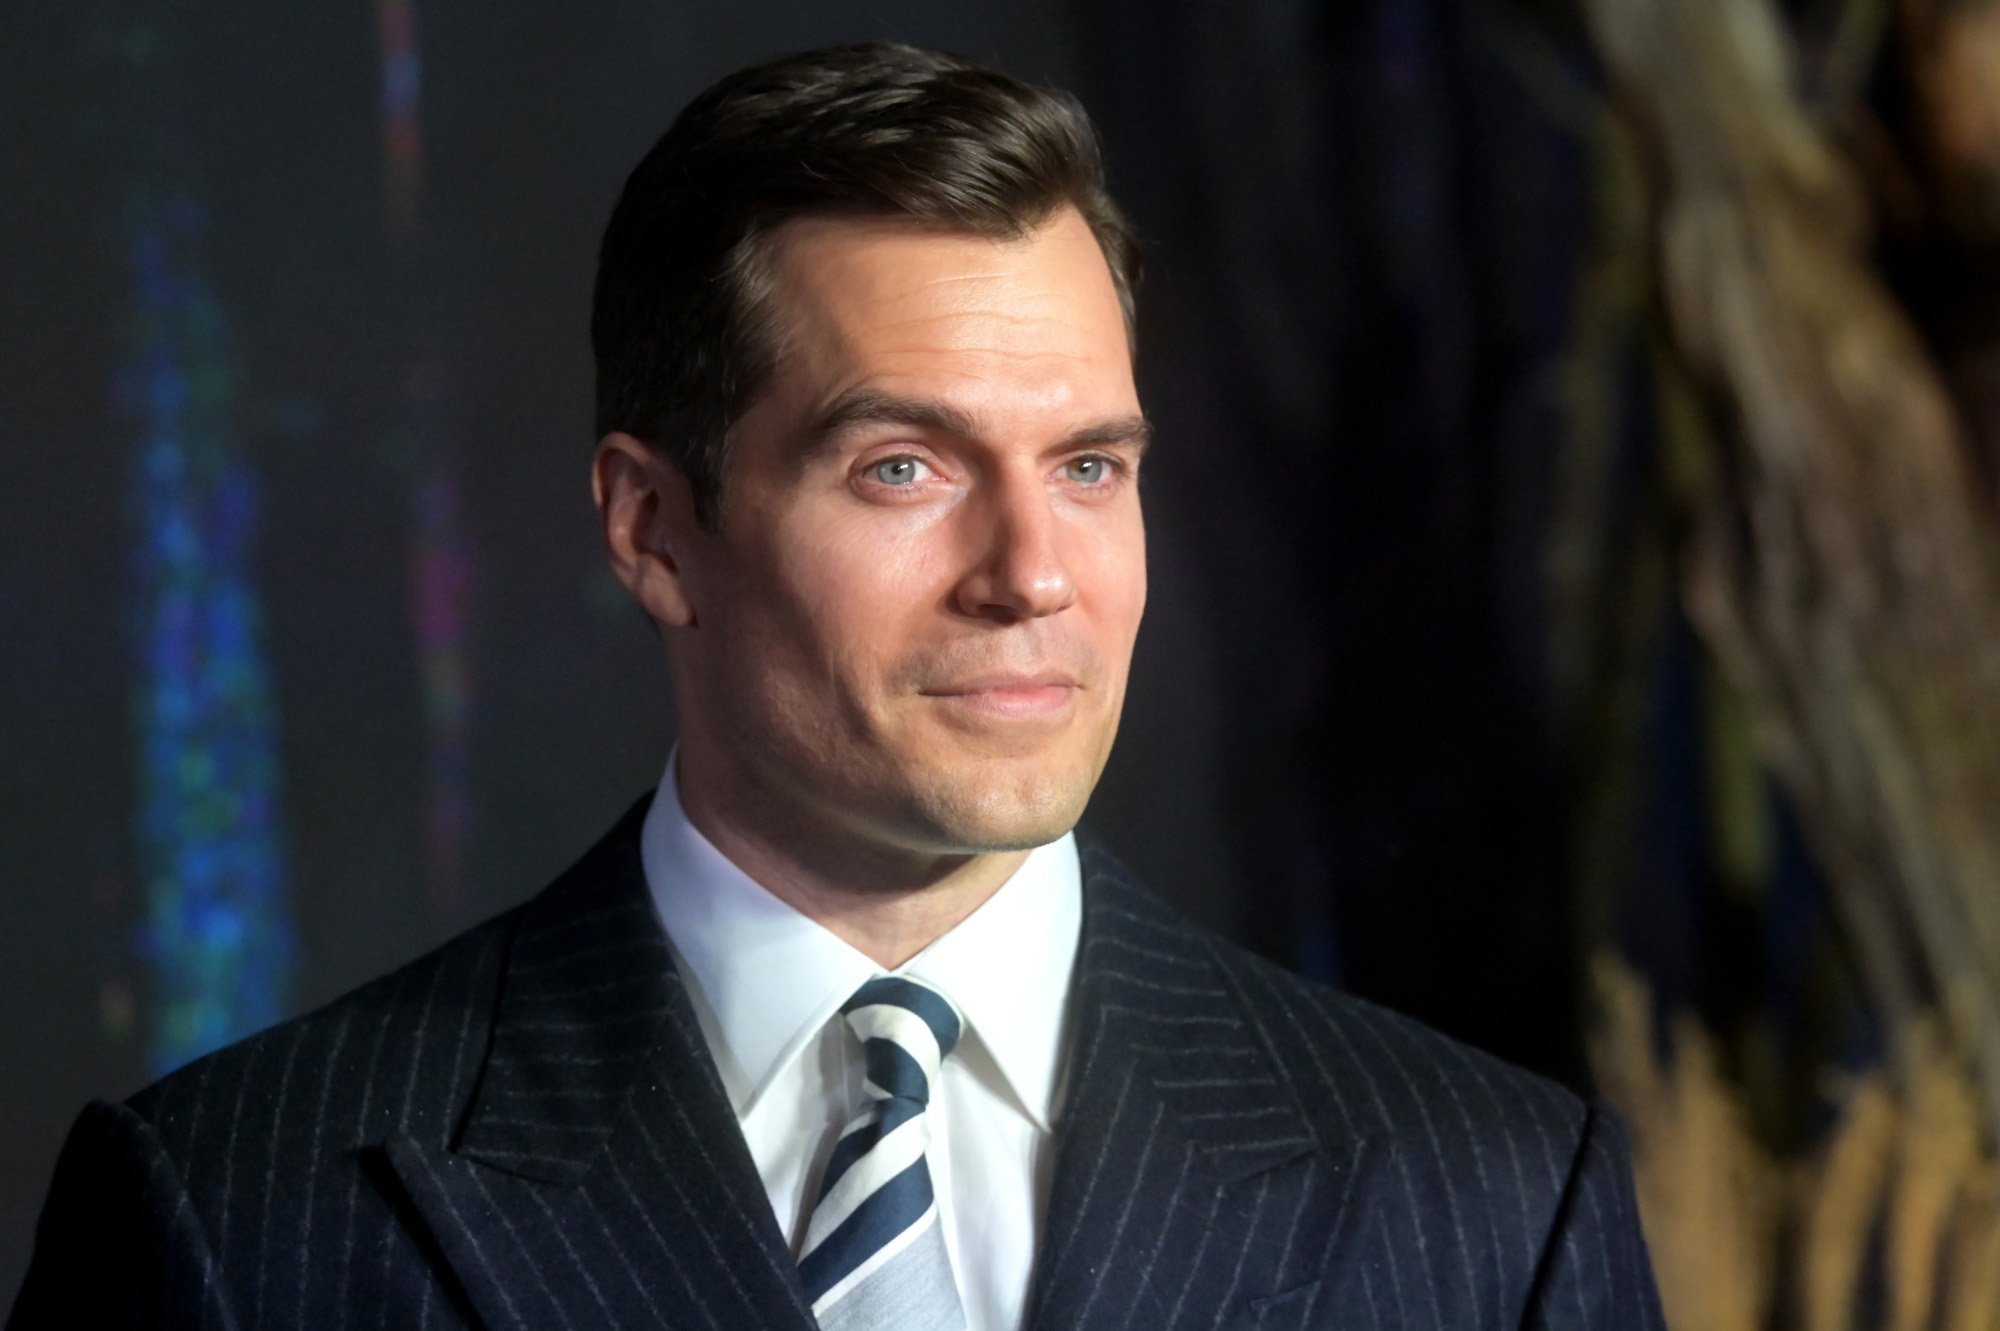 'The Witcher' star Henry Cavill on the red carpet for season 2. His brown hair is slicked back, and he's wearing a white shirt, black jacket, and black and white tie.